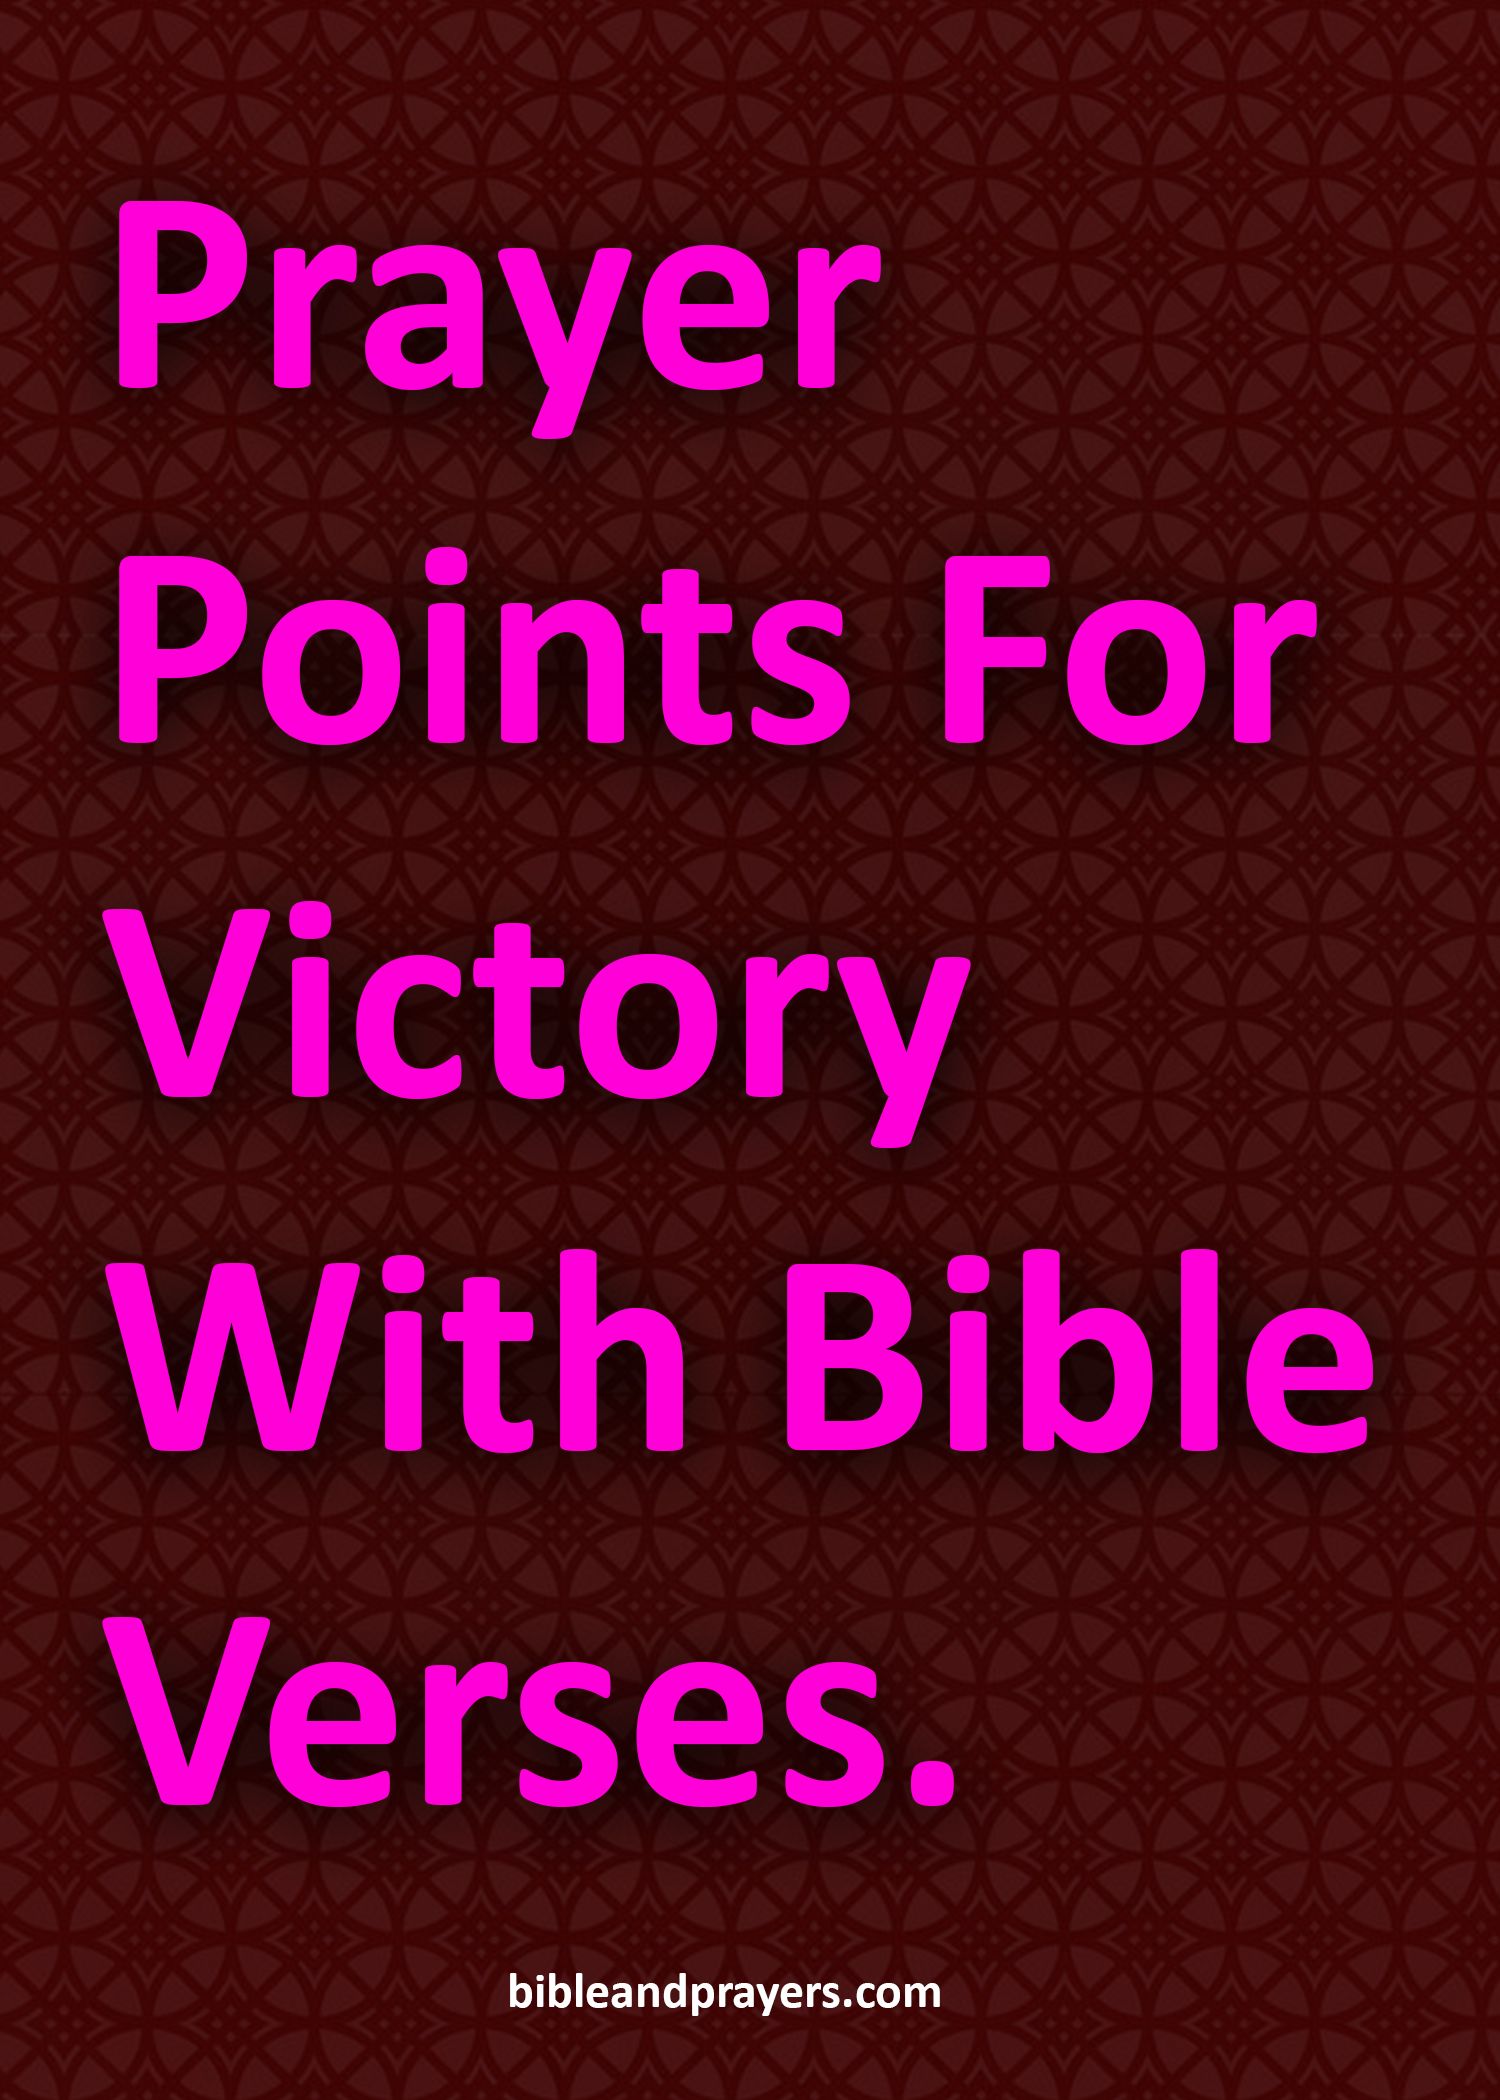 Prayer Points For Victory With Bible Verses